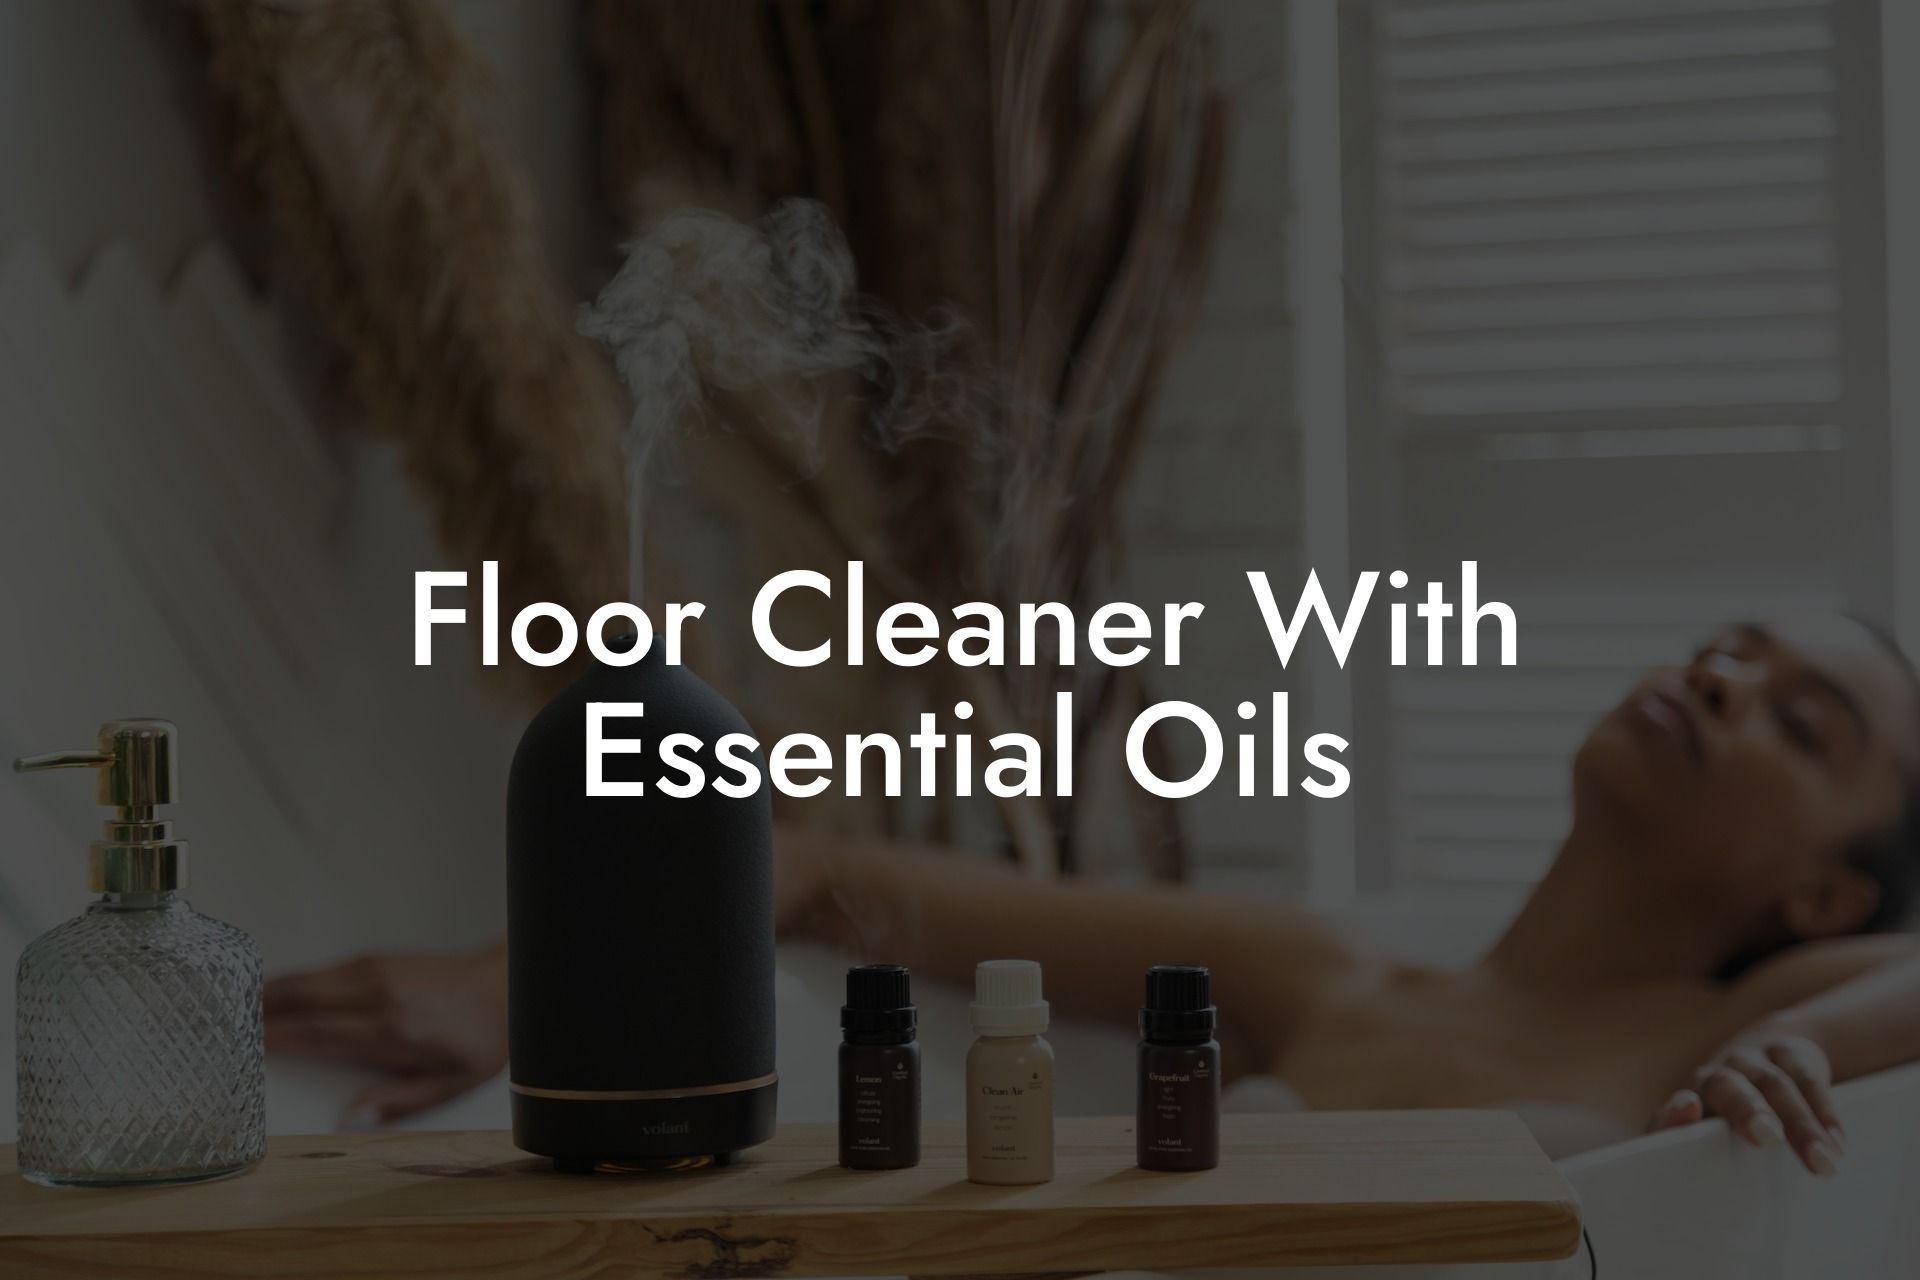 Floor Cleaner With Essential Oils